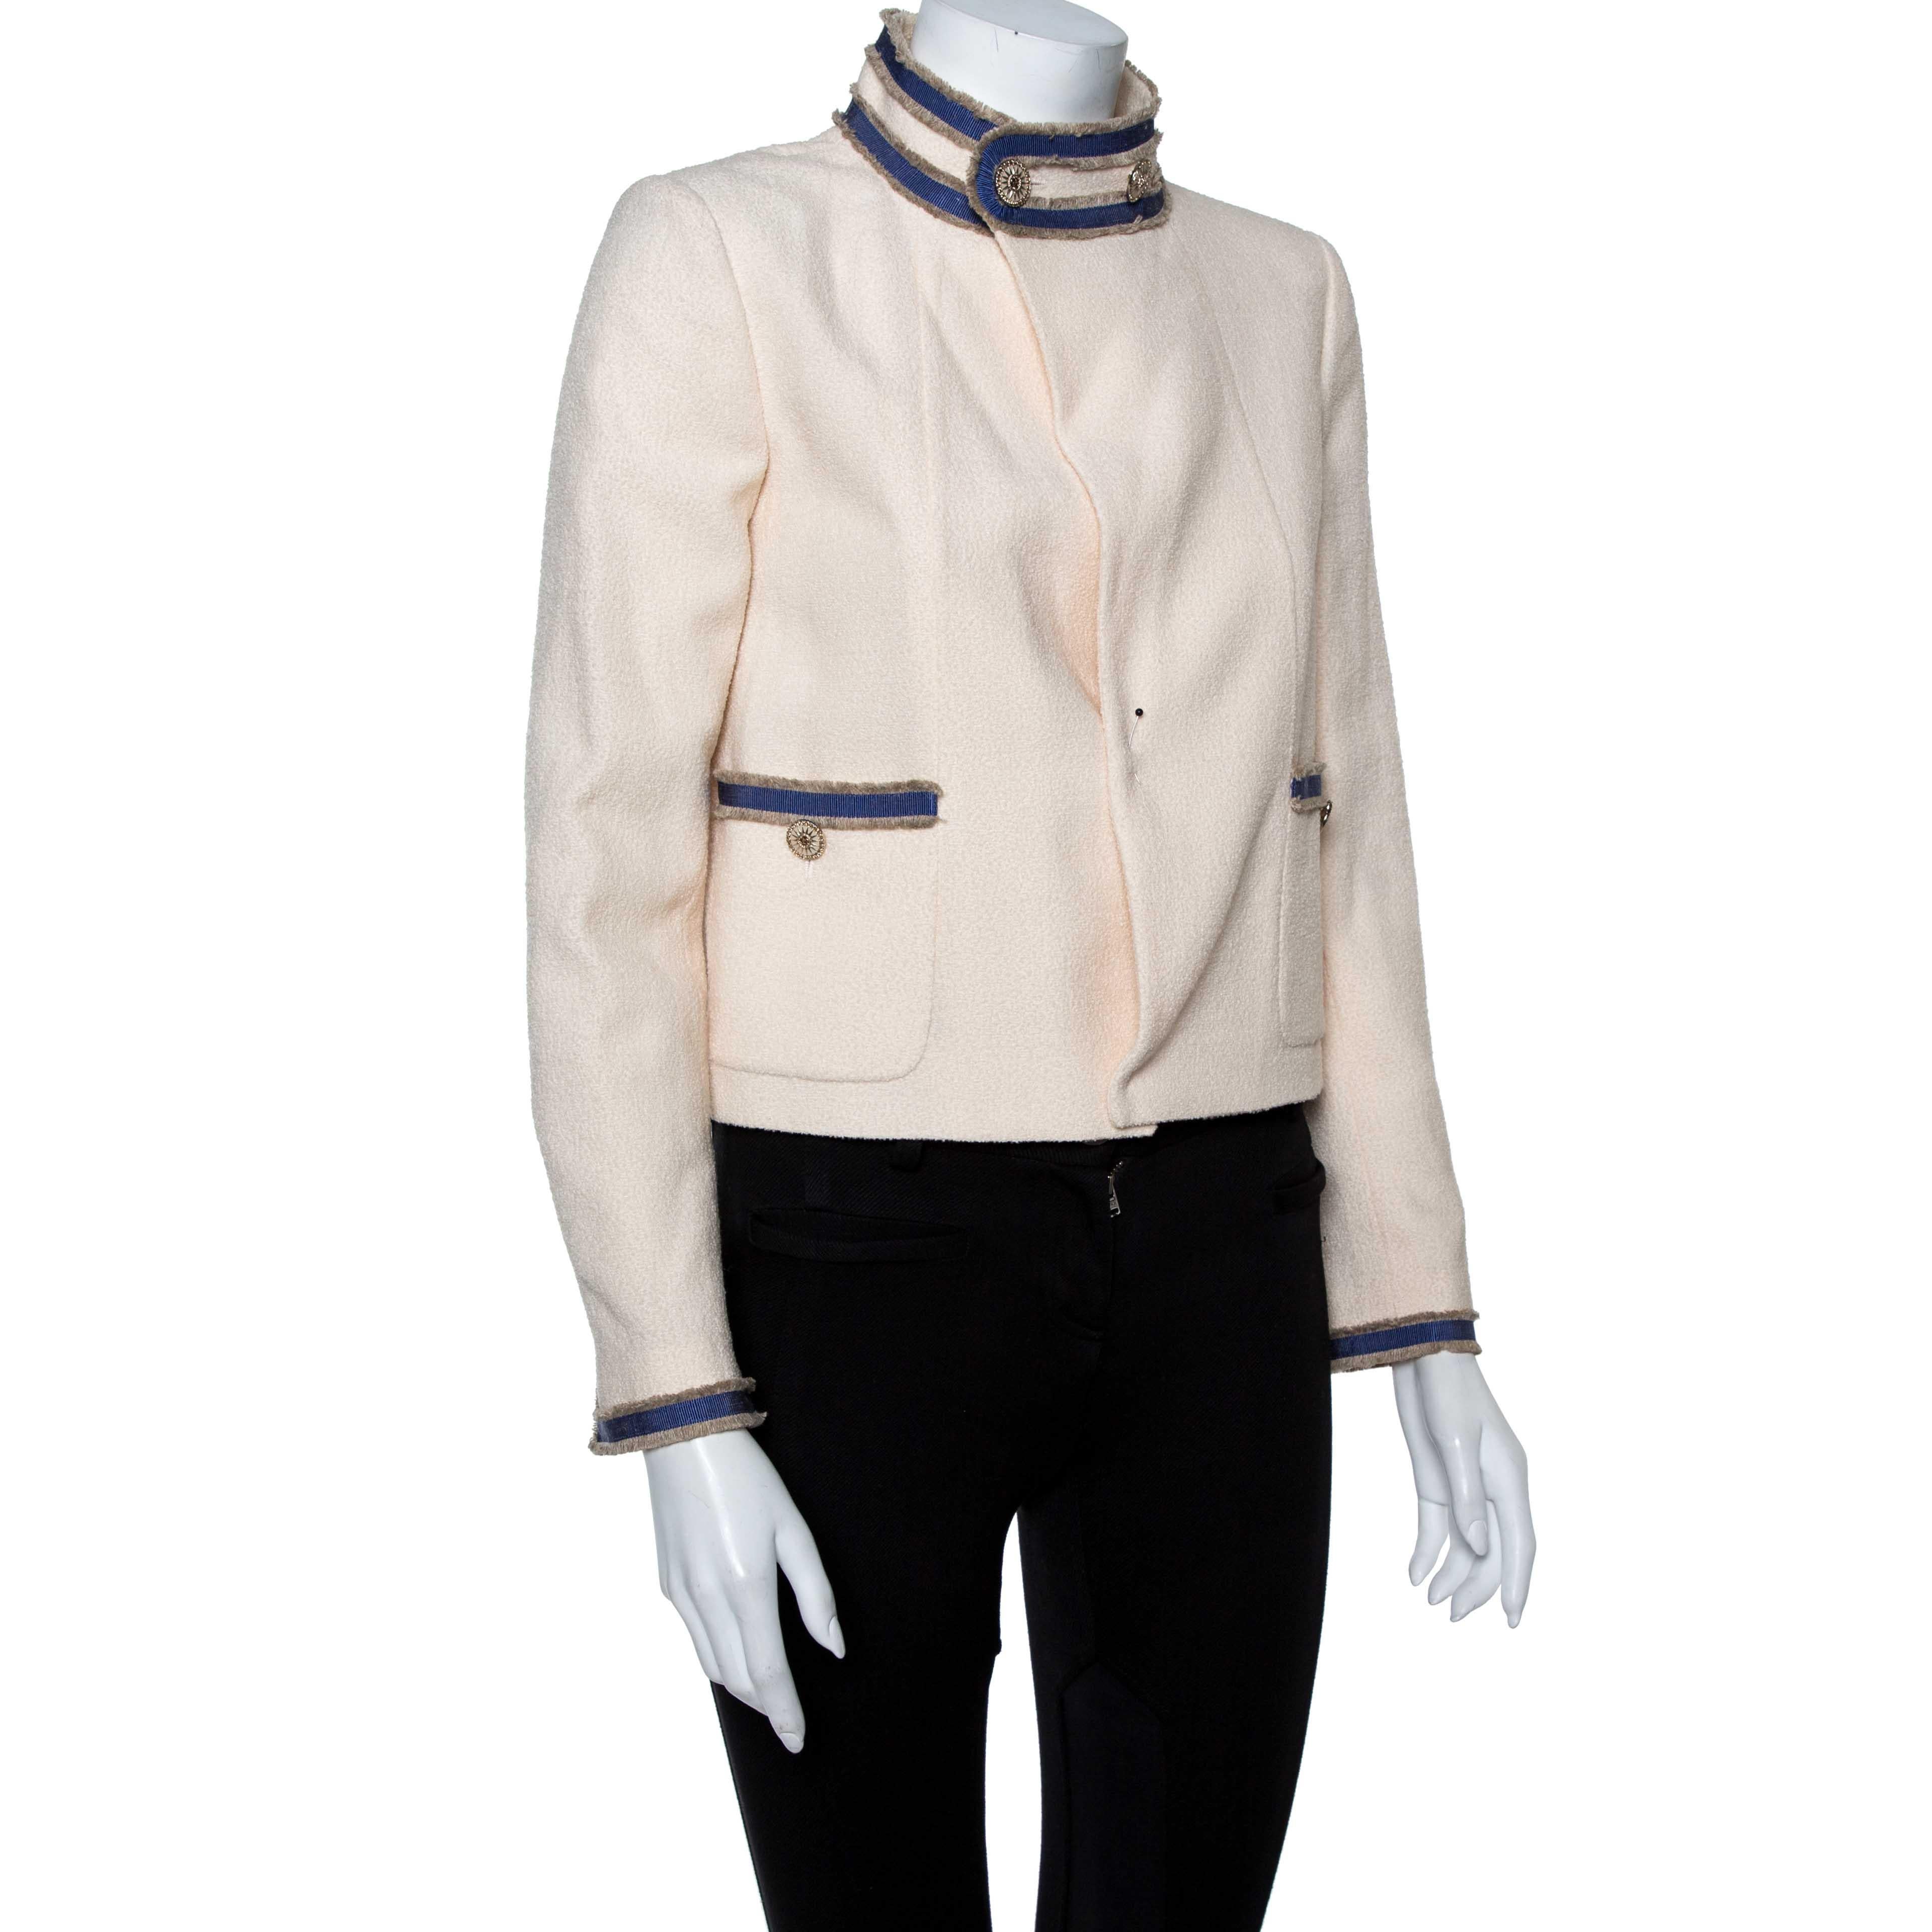 Known for creating stunning jackets since its inception, the Gucci jacket here is also another impeccable design from the brand. Made from quality materials, this boucle jacket comes in a lovely cream hue and flaunts contrasting trims. It is